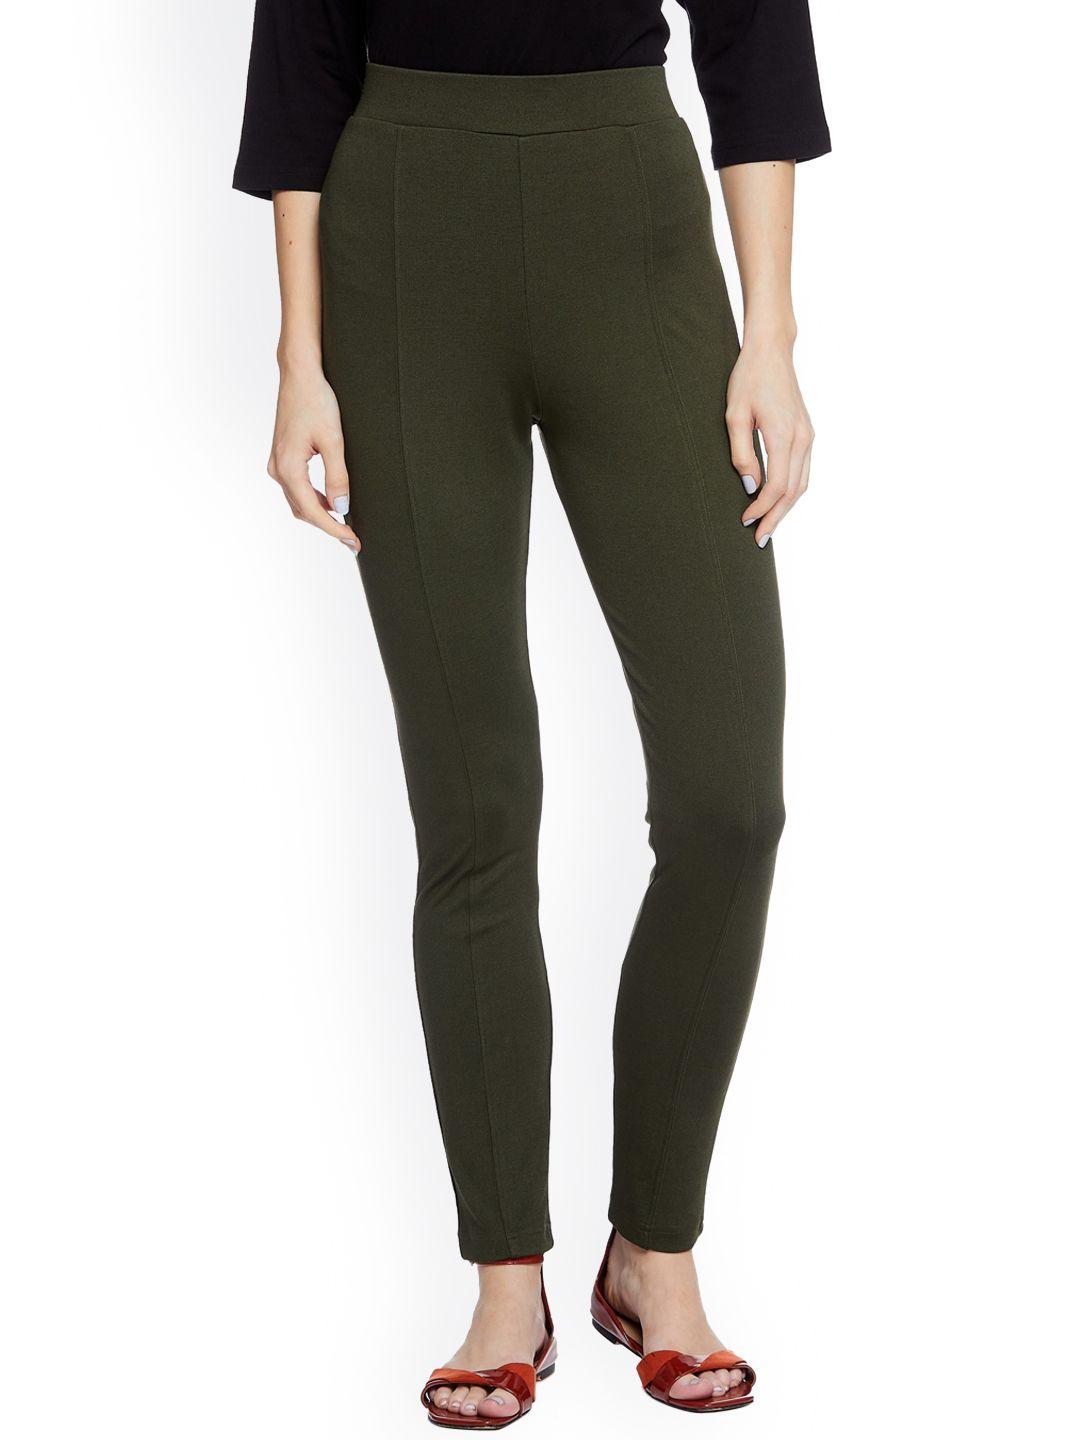 unmade women high rise slim fit trousers